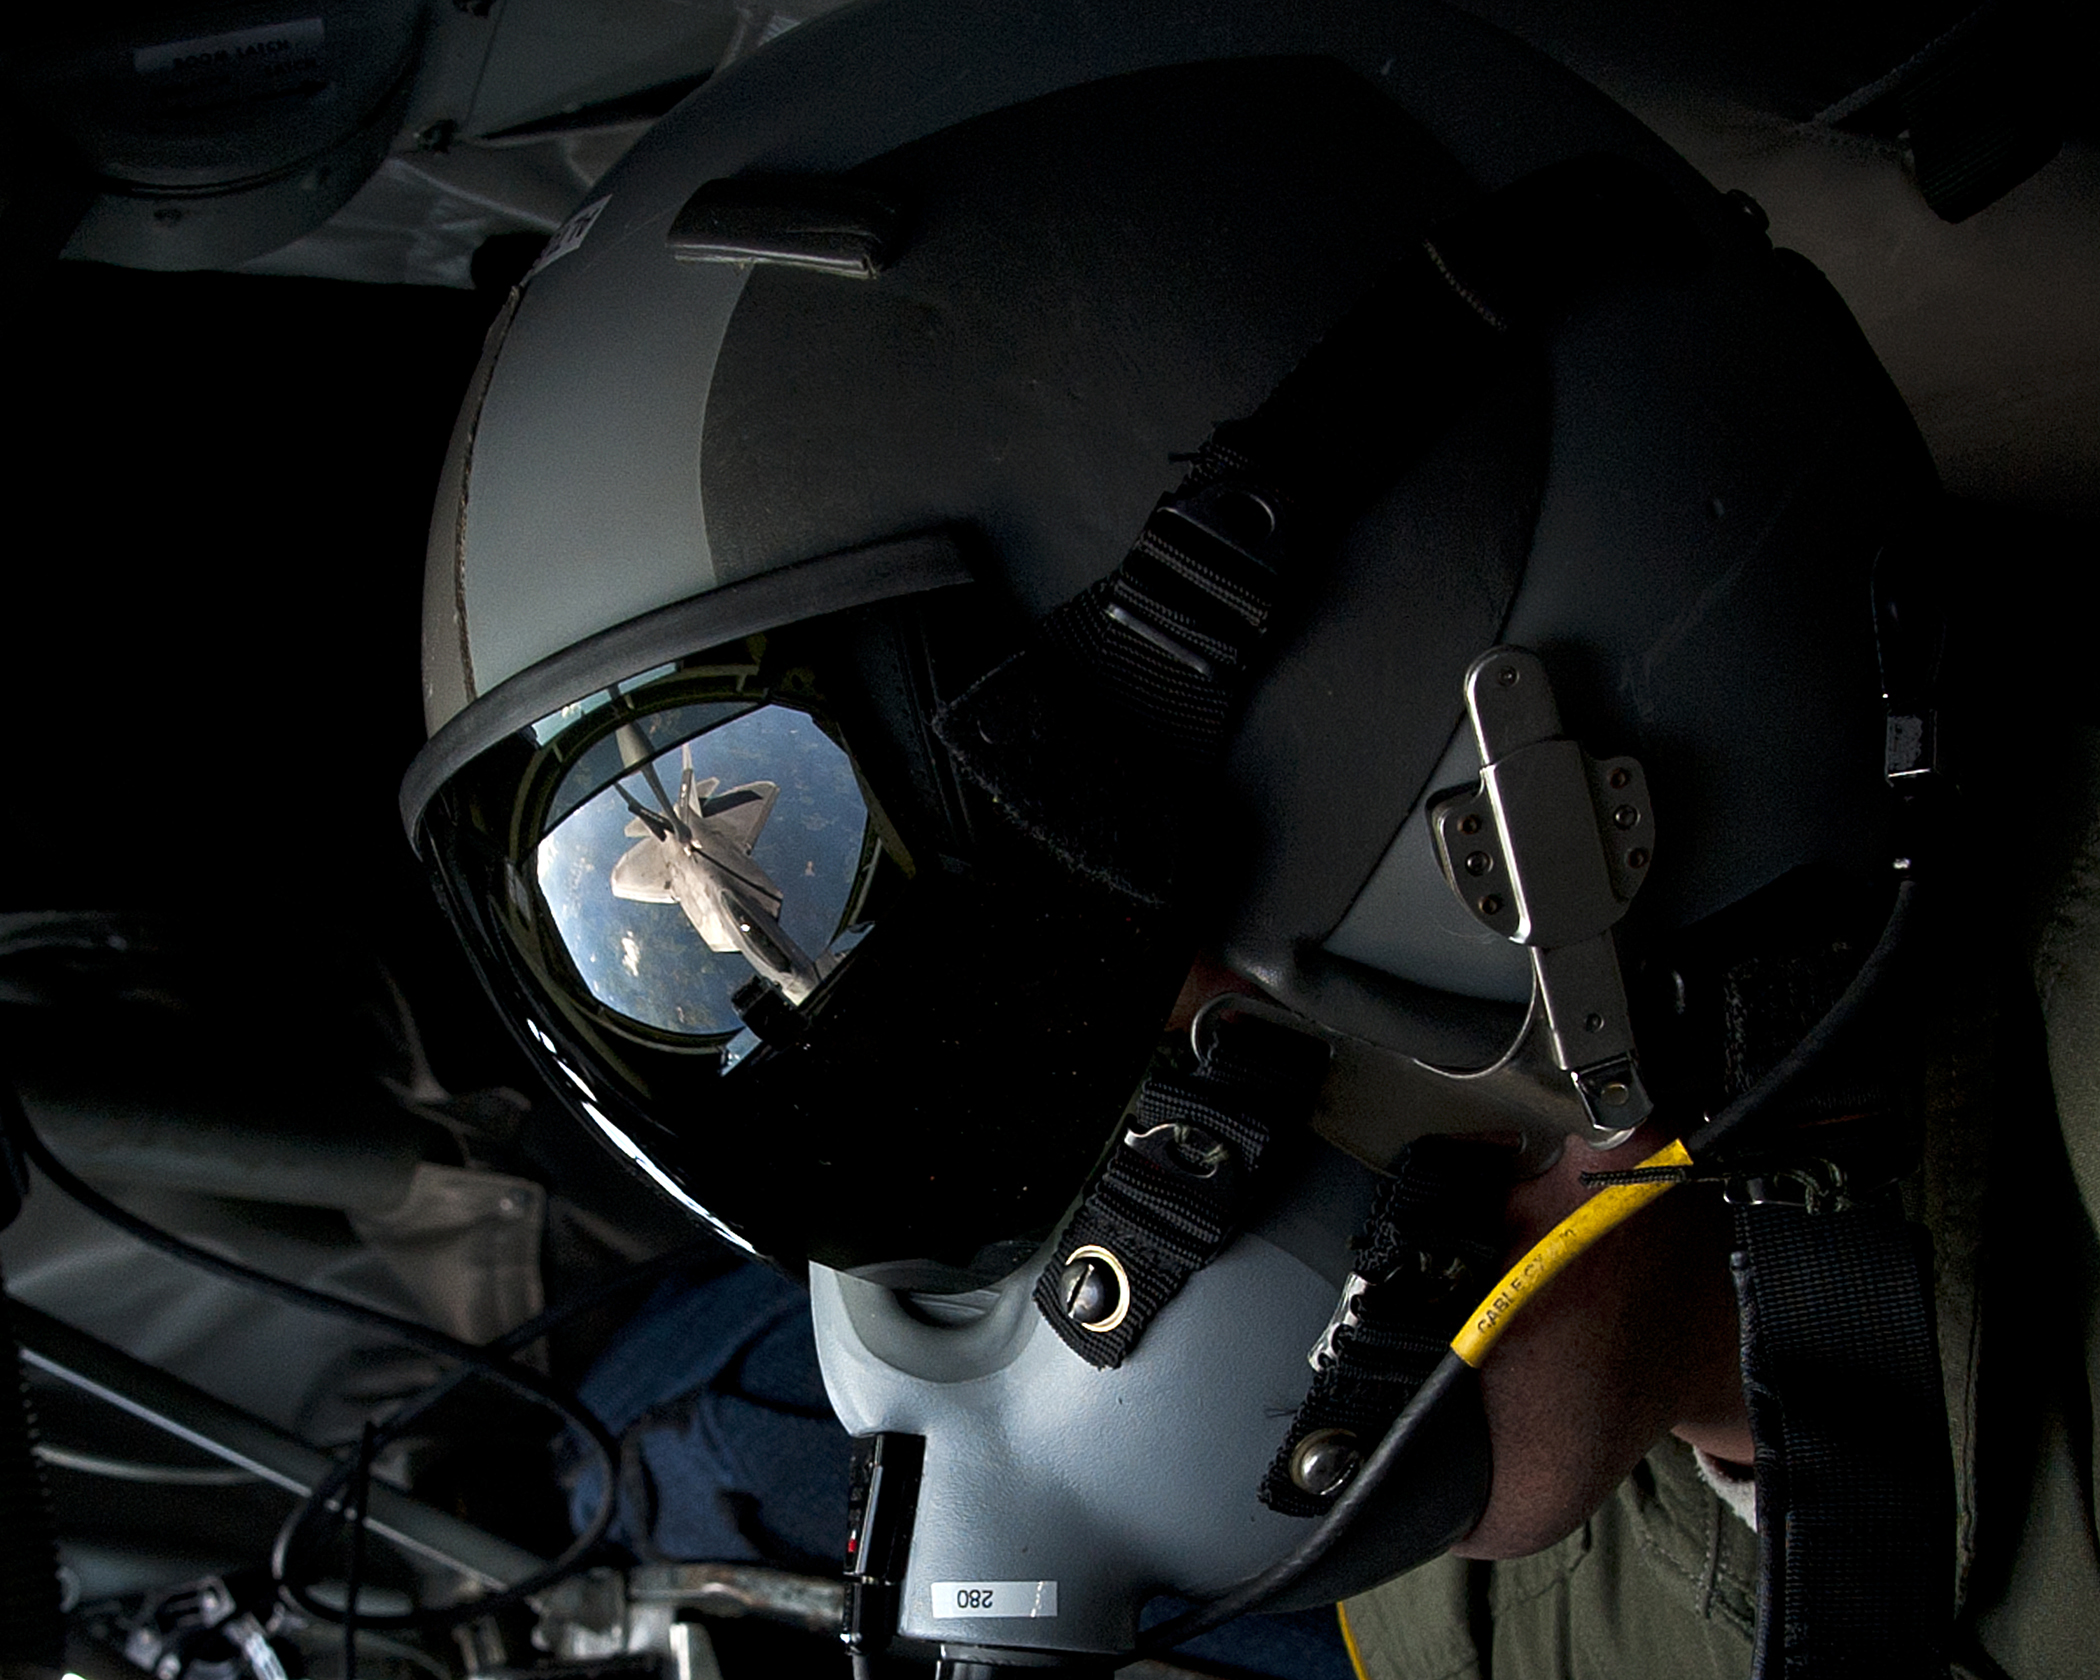 PHOTO: U.S. Air Force Tech. Sgt. Bartek Bachleda, a KC-135 Stratotanker boom operator instructor with the 54th Air Refueling Squadron at Altus Air Force Base, Okla., refuels an F-22 Raptor aircraft, Aug. 21, 2012, over New York.